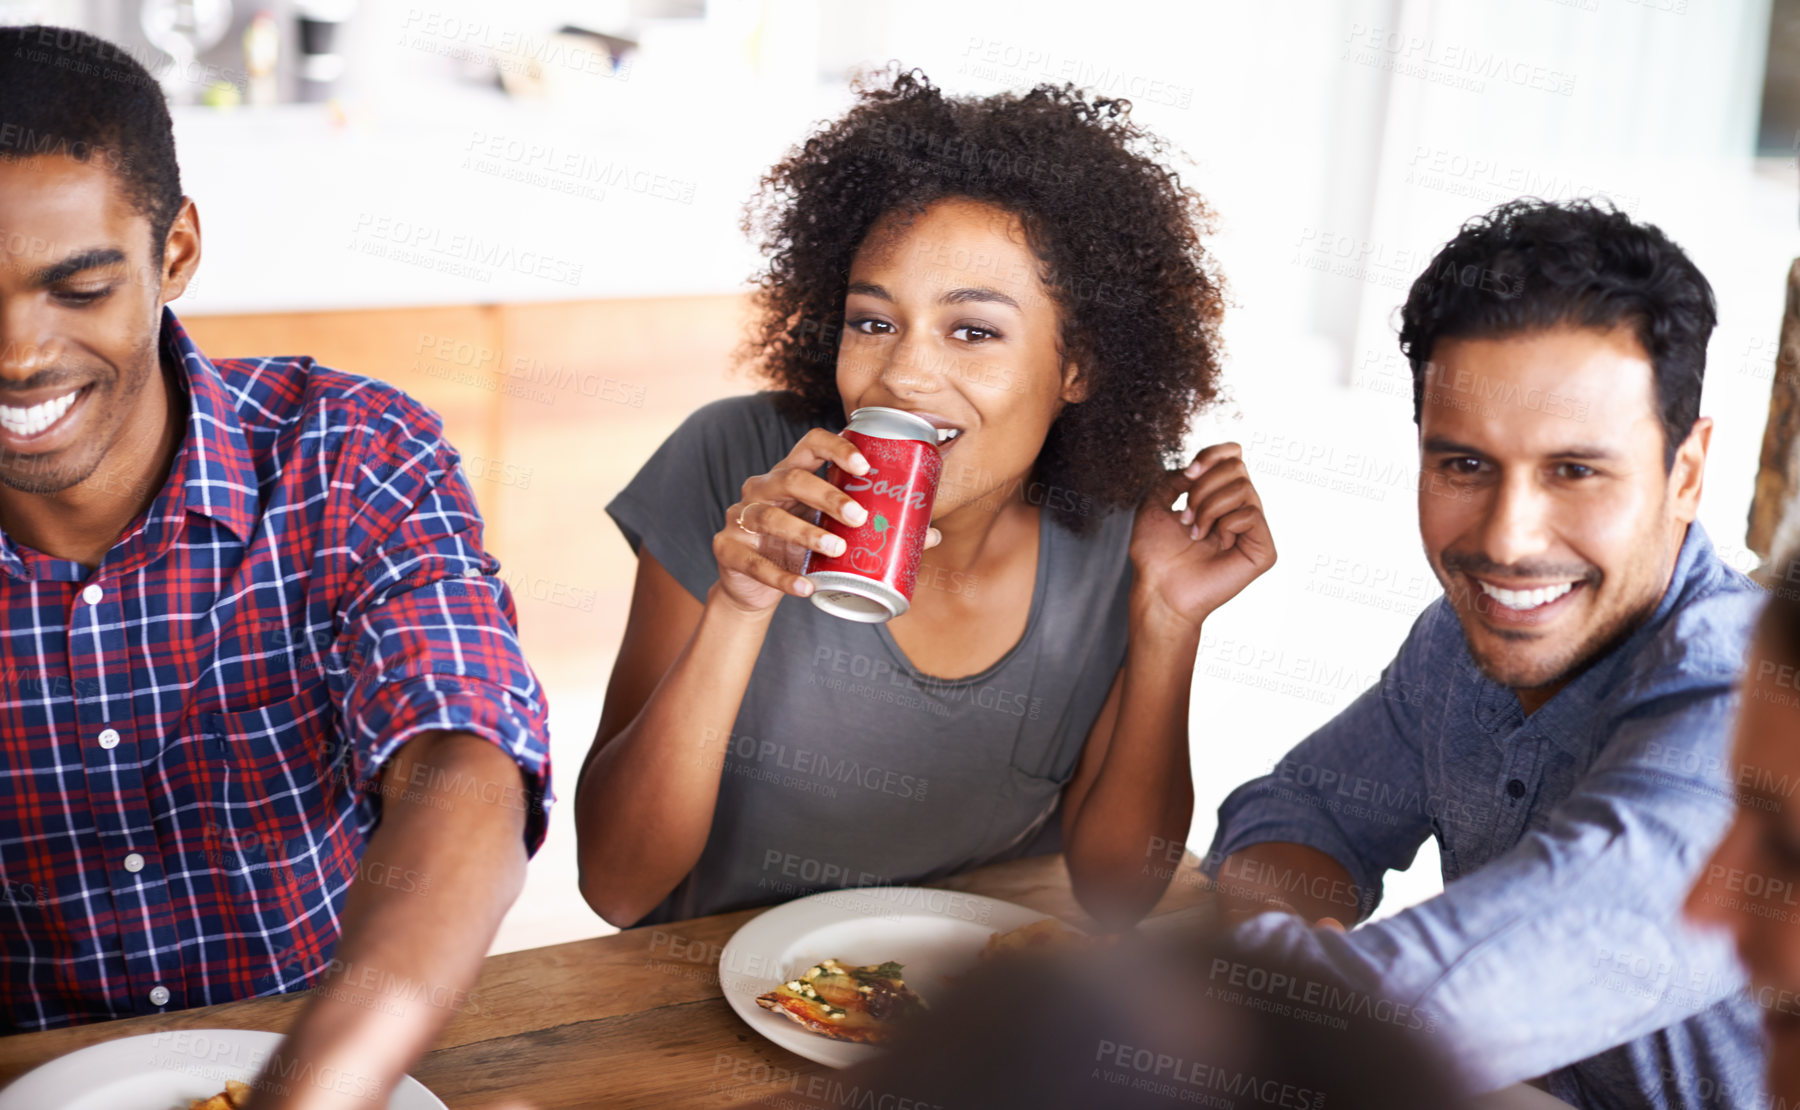 Buy stock photo Cropped shot of a group of friends enjoying pizza together